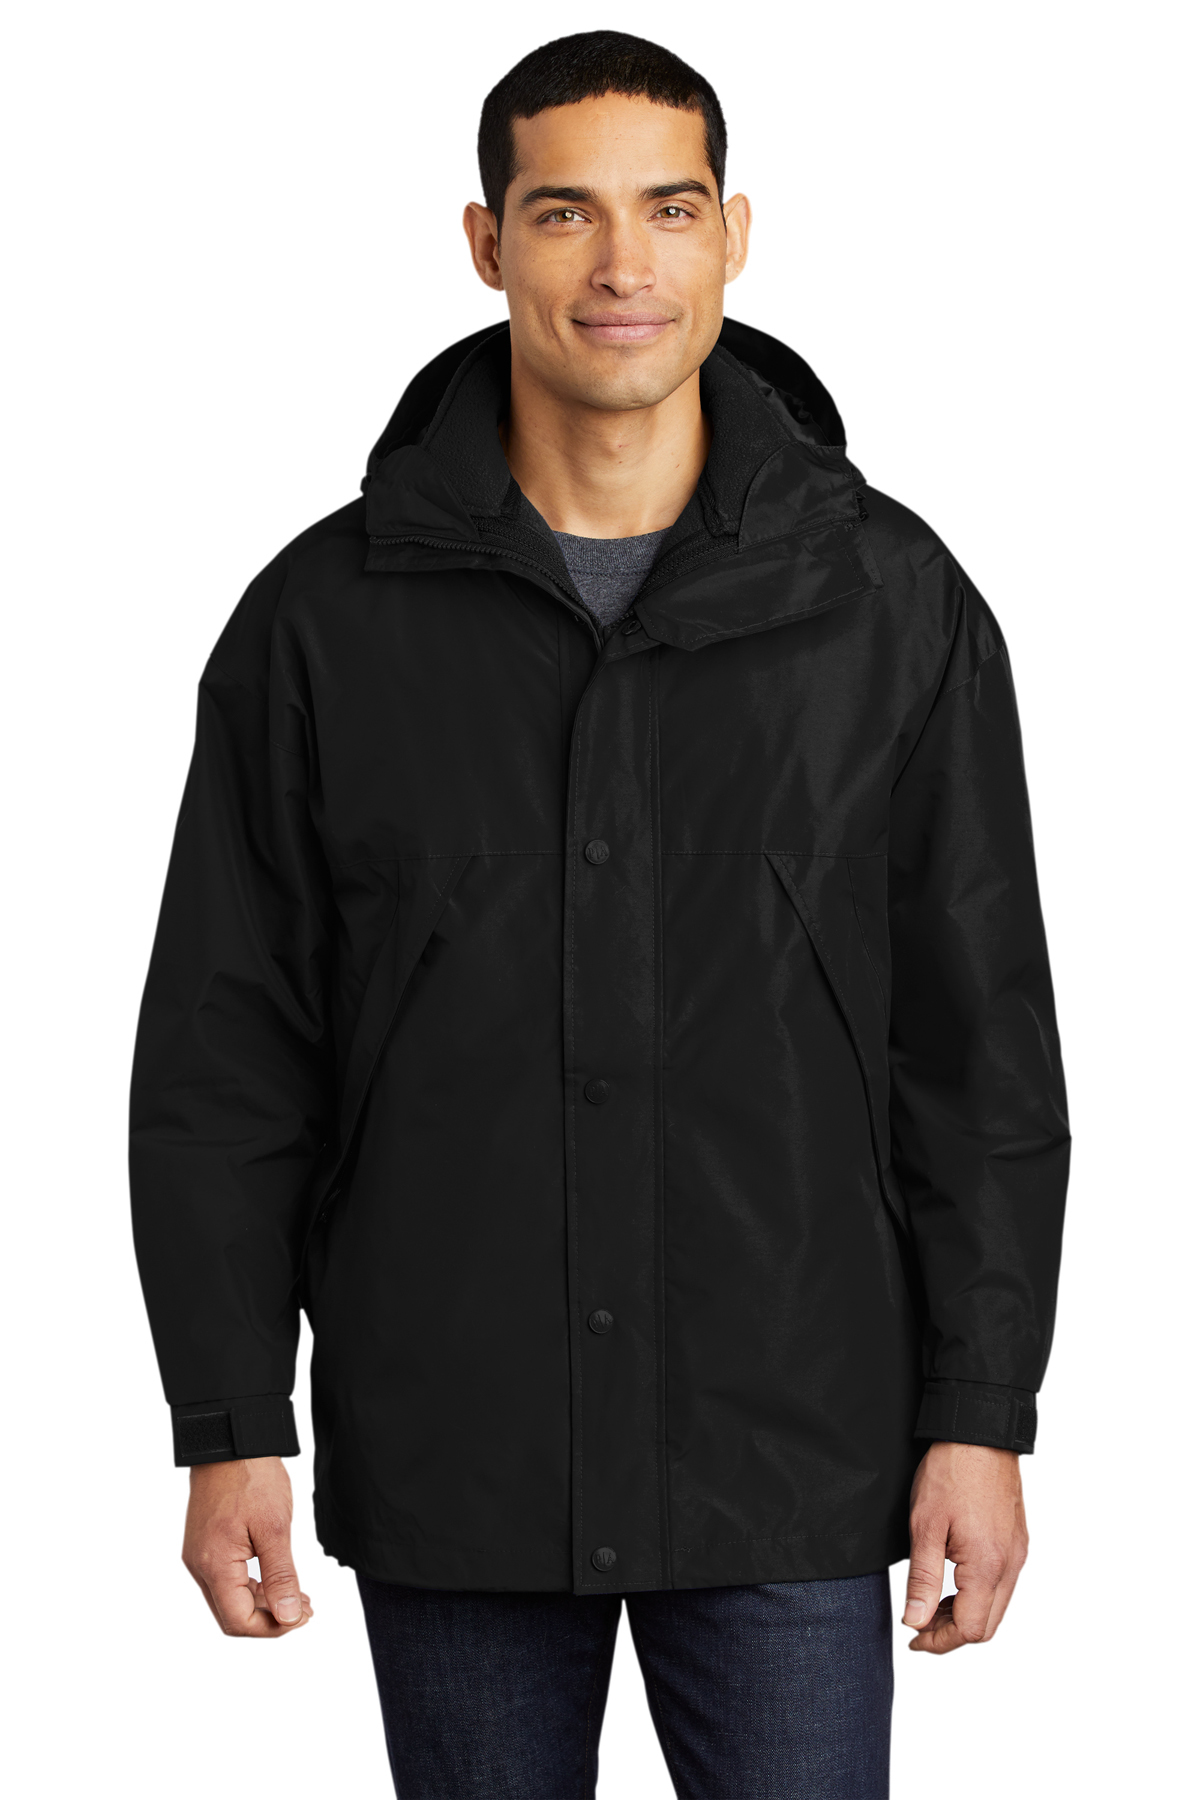 Port Authority 3-in-1 Jacket | Product | Company Casuals